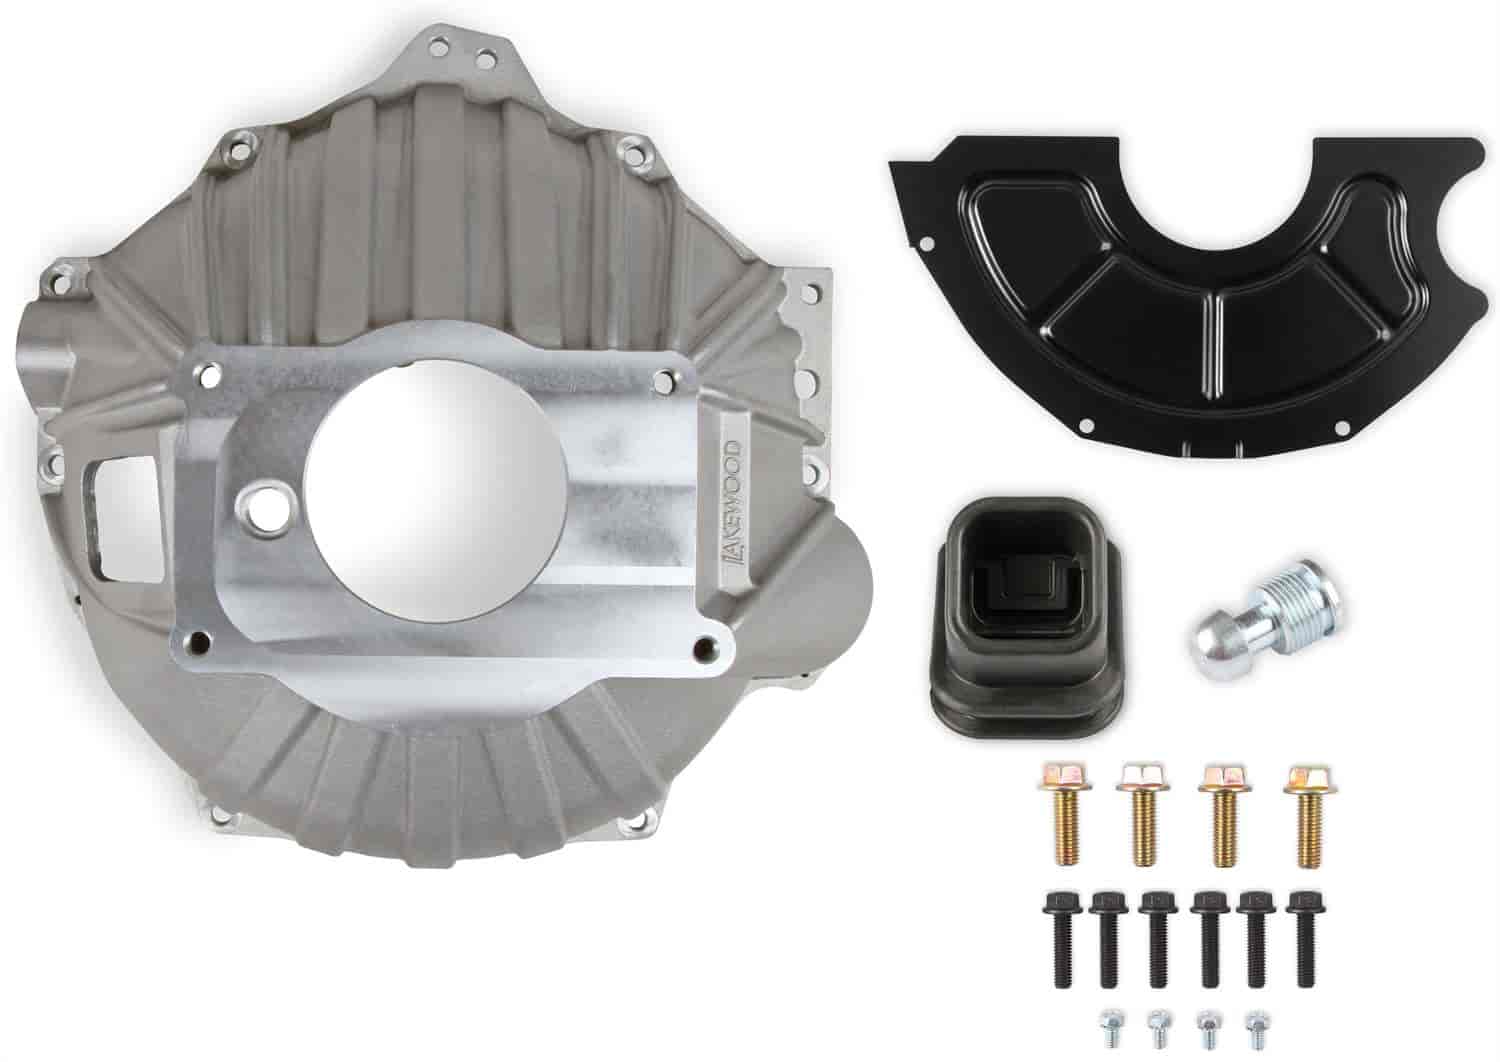 Cast-Aluminum Bellhousing Kit for Small Block Chevy and